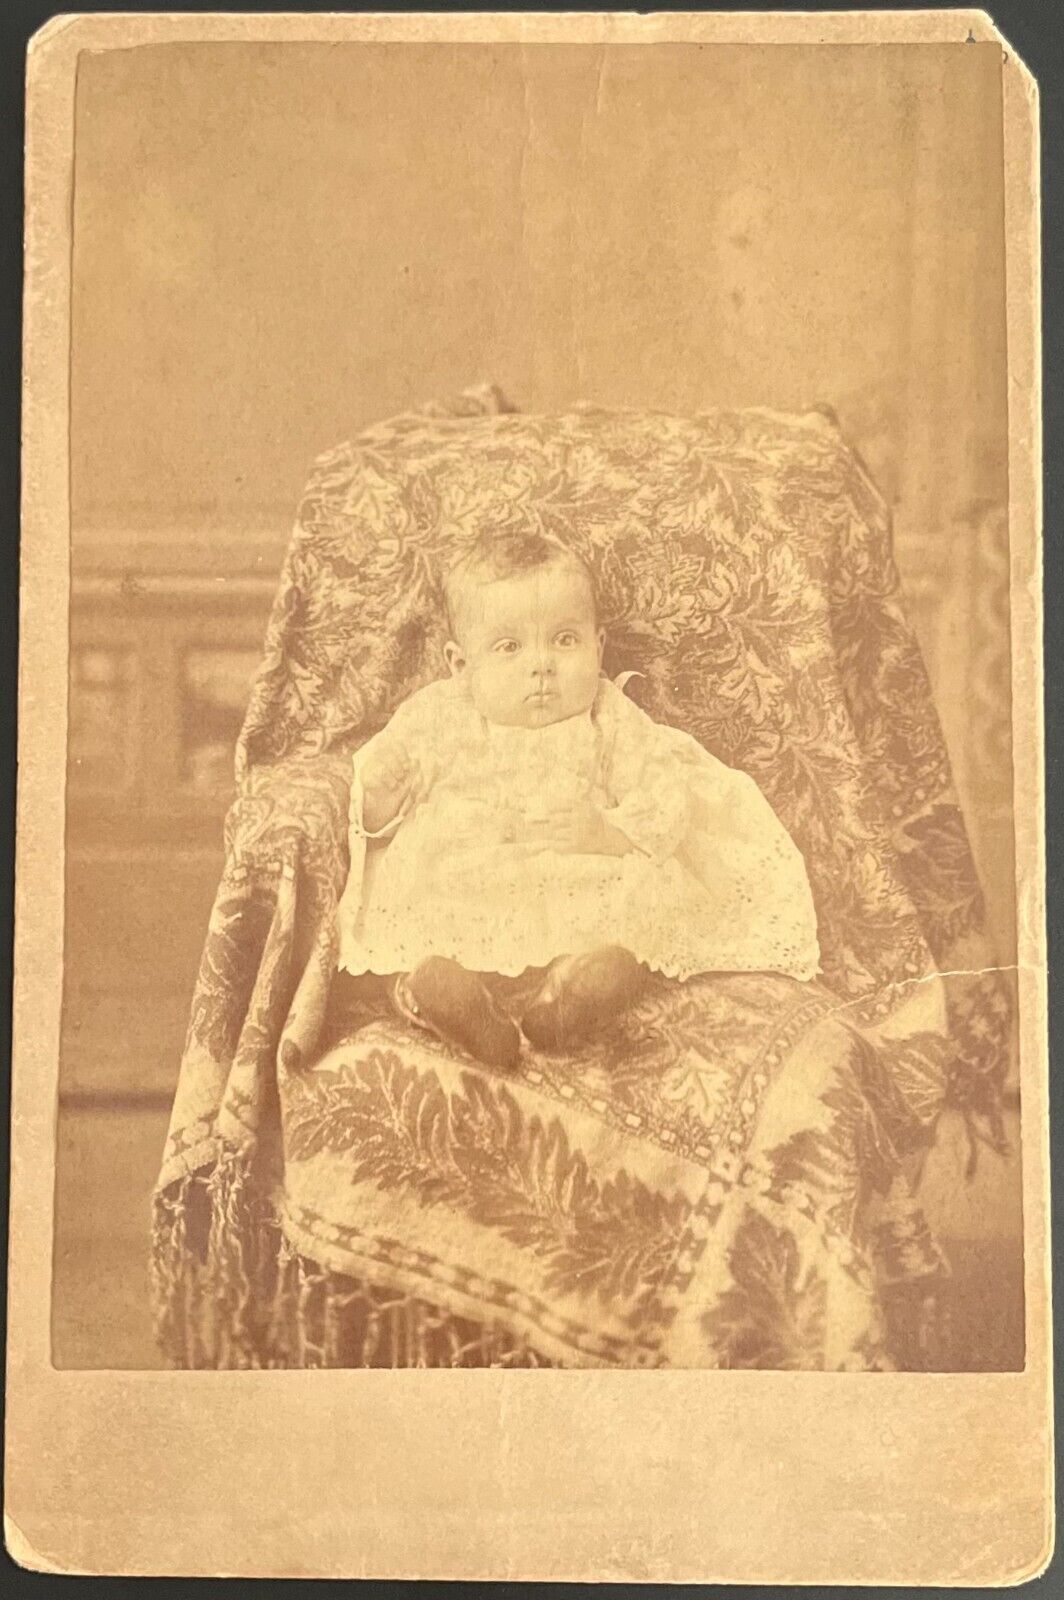 ~LATE 1860s-EARLY 1870s POST CIVIL WAR CABINET CARD PHOTO INFANT, NAME ON BACK